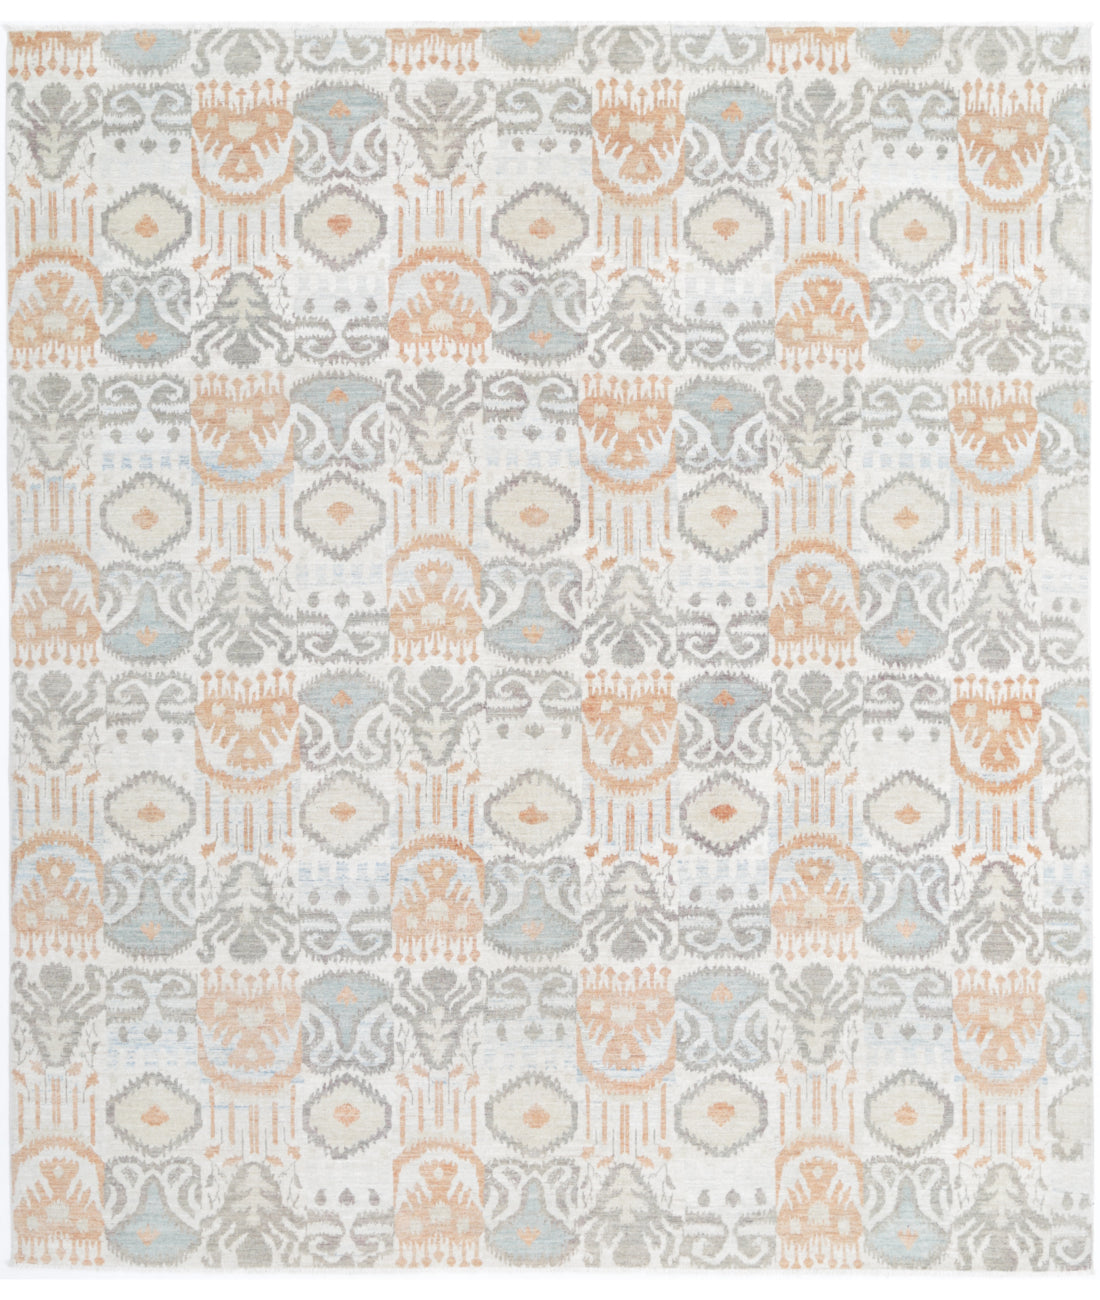 Hand Knotted Art & Craft Wool Rug - 8'1'' x 9'6'' 8'1'' x 9'6'' (243 X 285) / Ivory / Grey